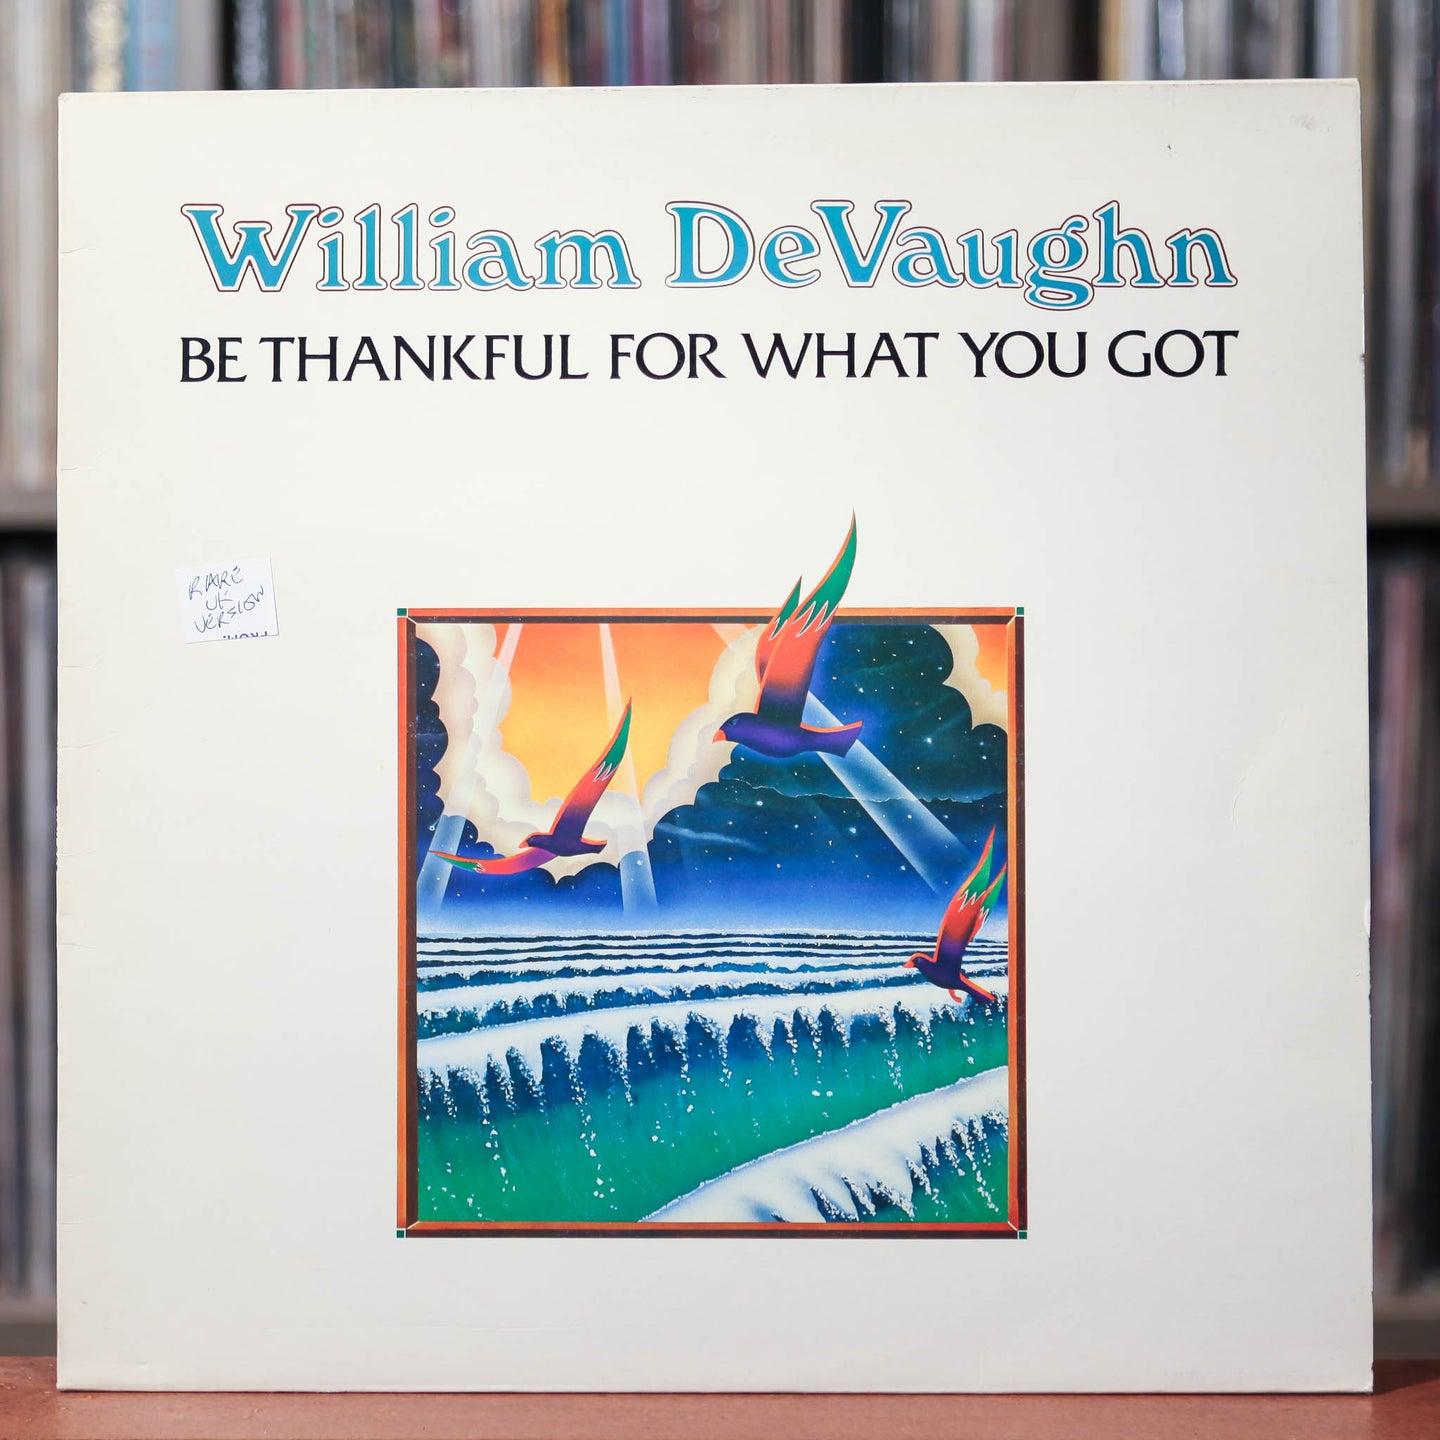 William DeVaughn - Be Thankful For What You Got - UK Import - 1974 Chelsea Records, VG+/VG+